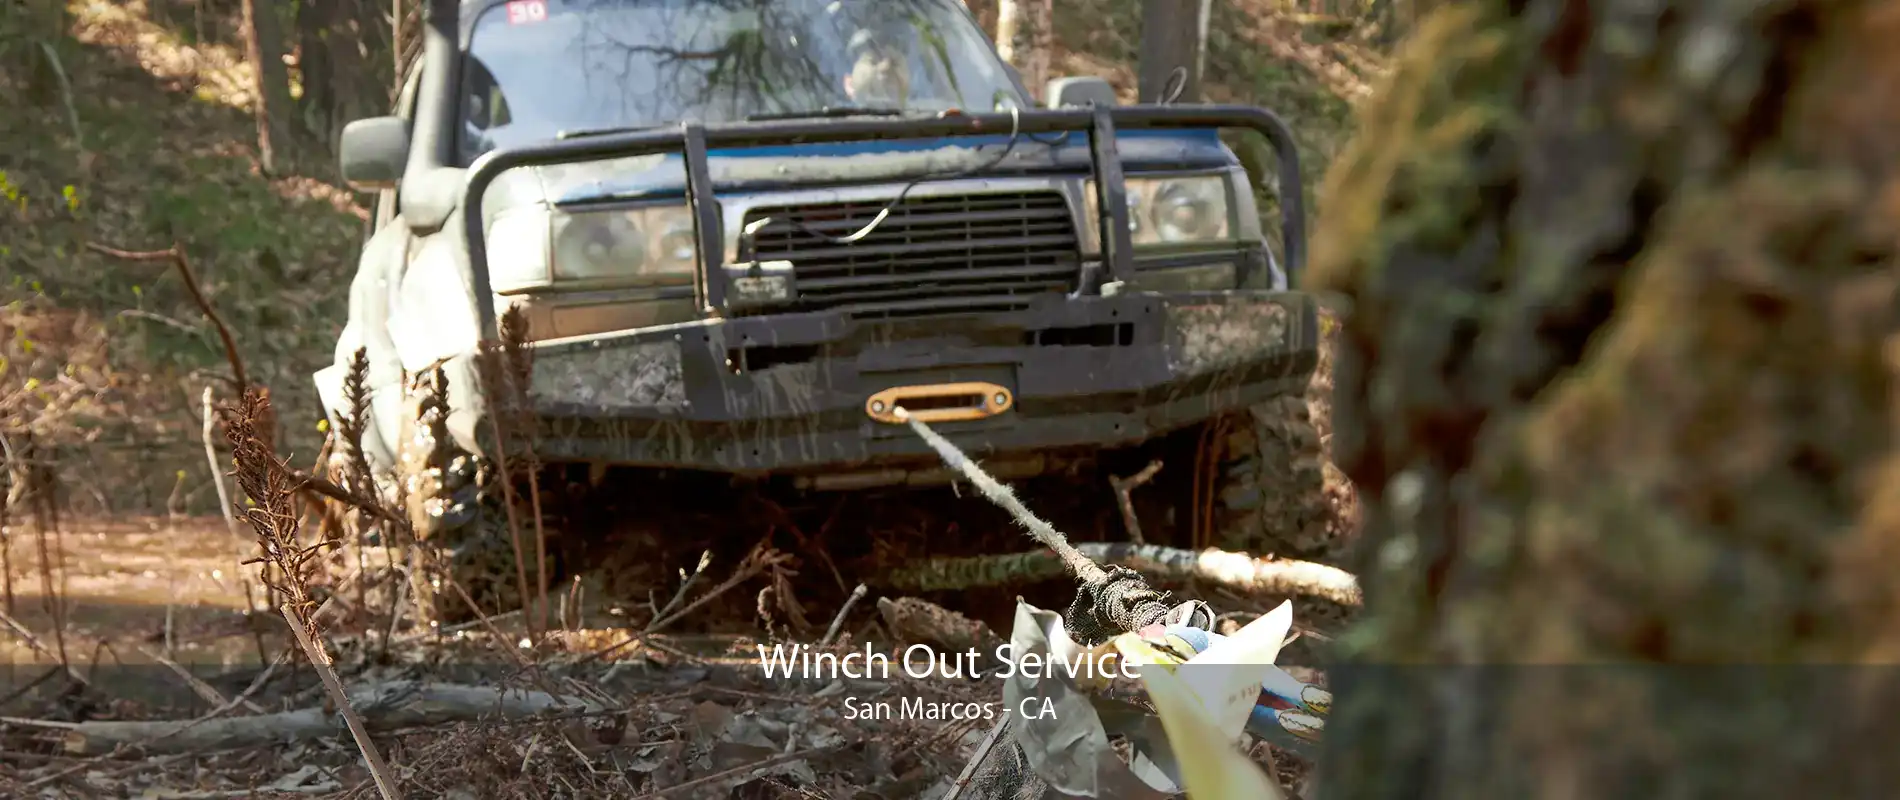 Winch Out Service San Marcos - CA